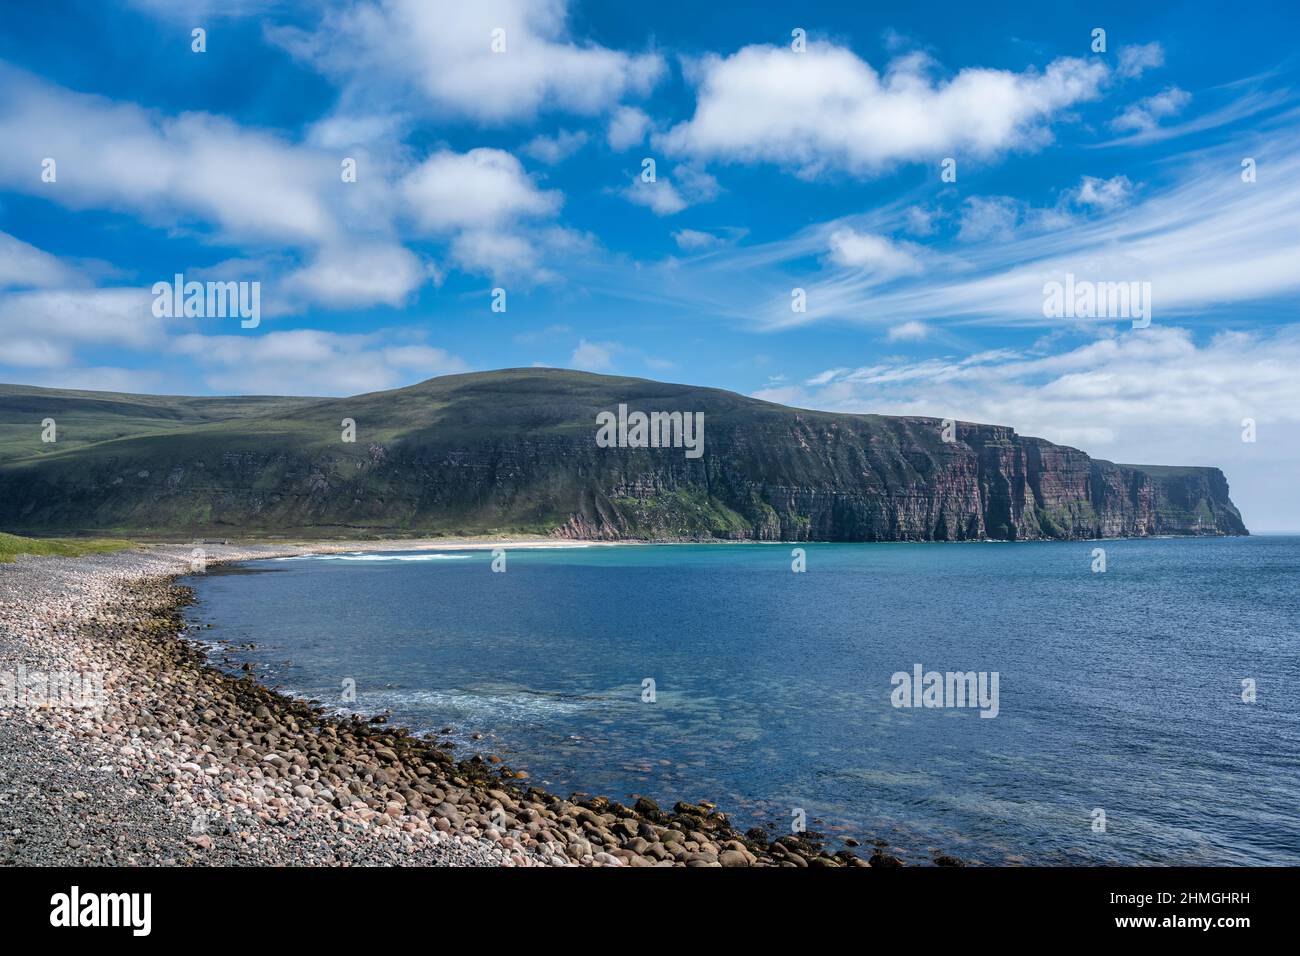 View looking south across Rackwick Beach to towering cliffs of Rackwick Bay, Isle of Hoy, Orkney, Scotland, UK Stock Photo